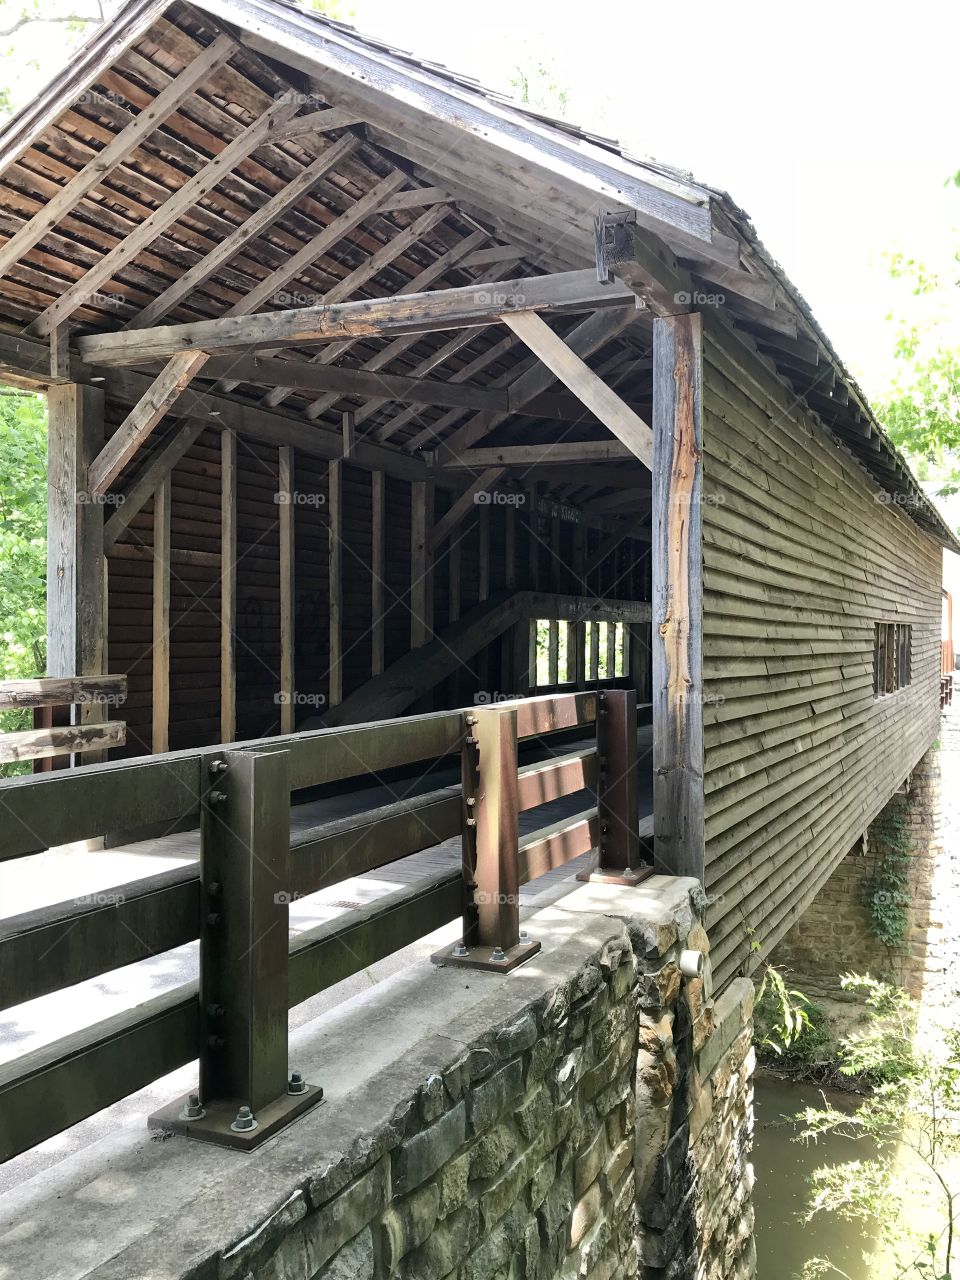 An early covered bridge that we drive though 